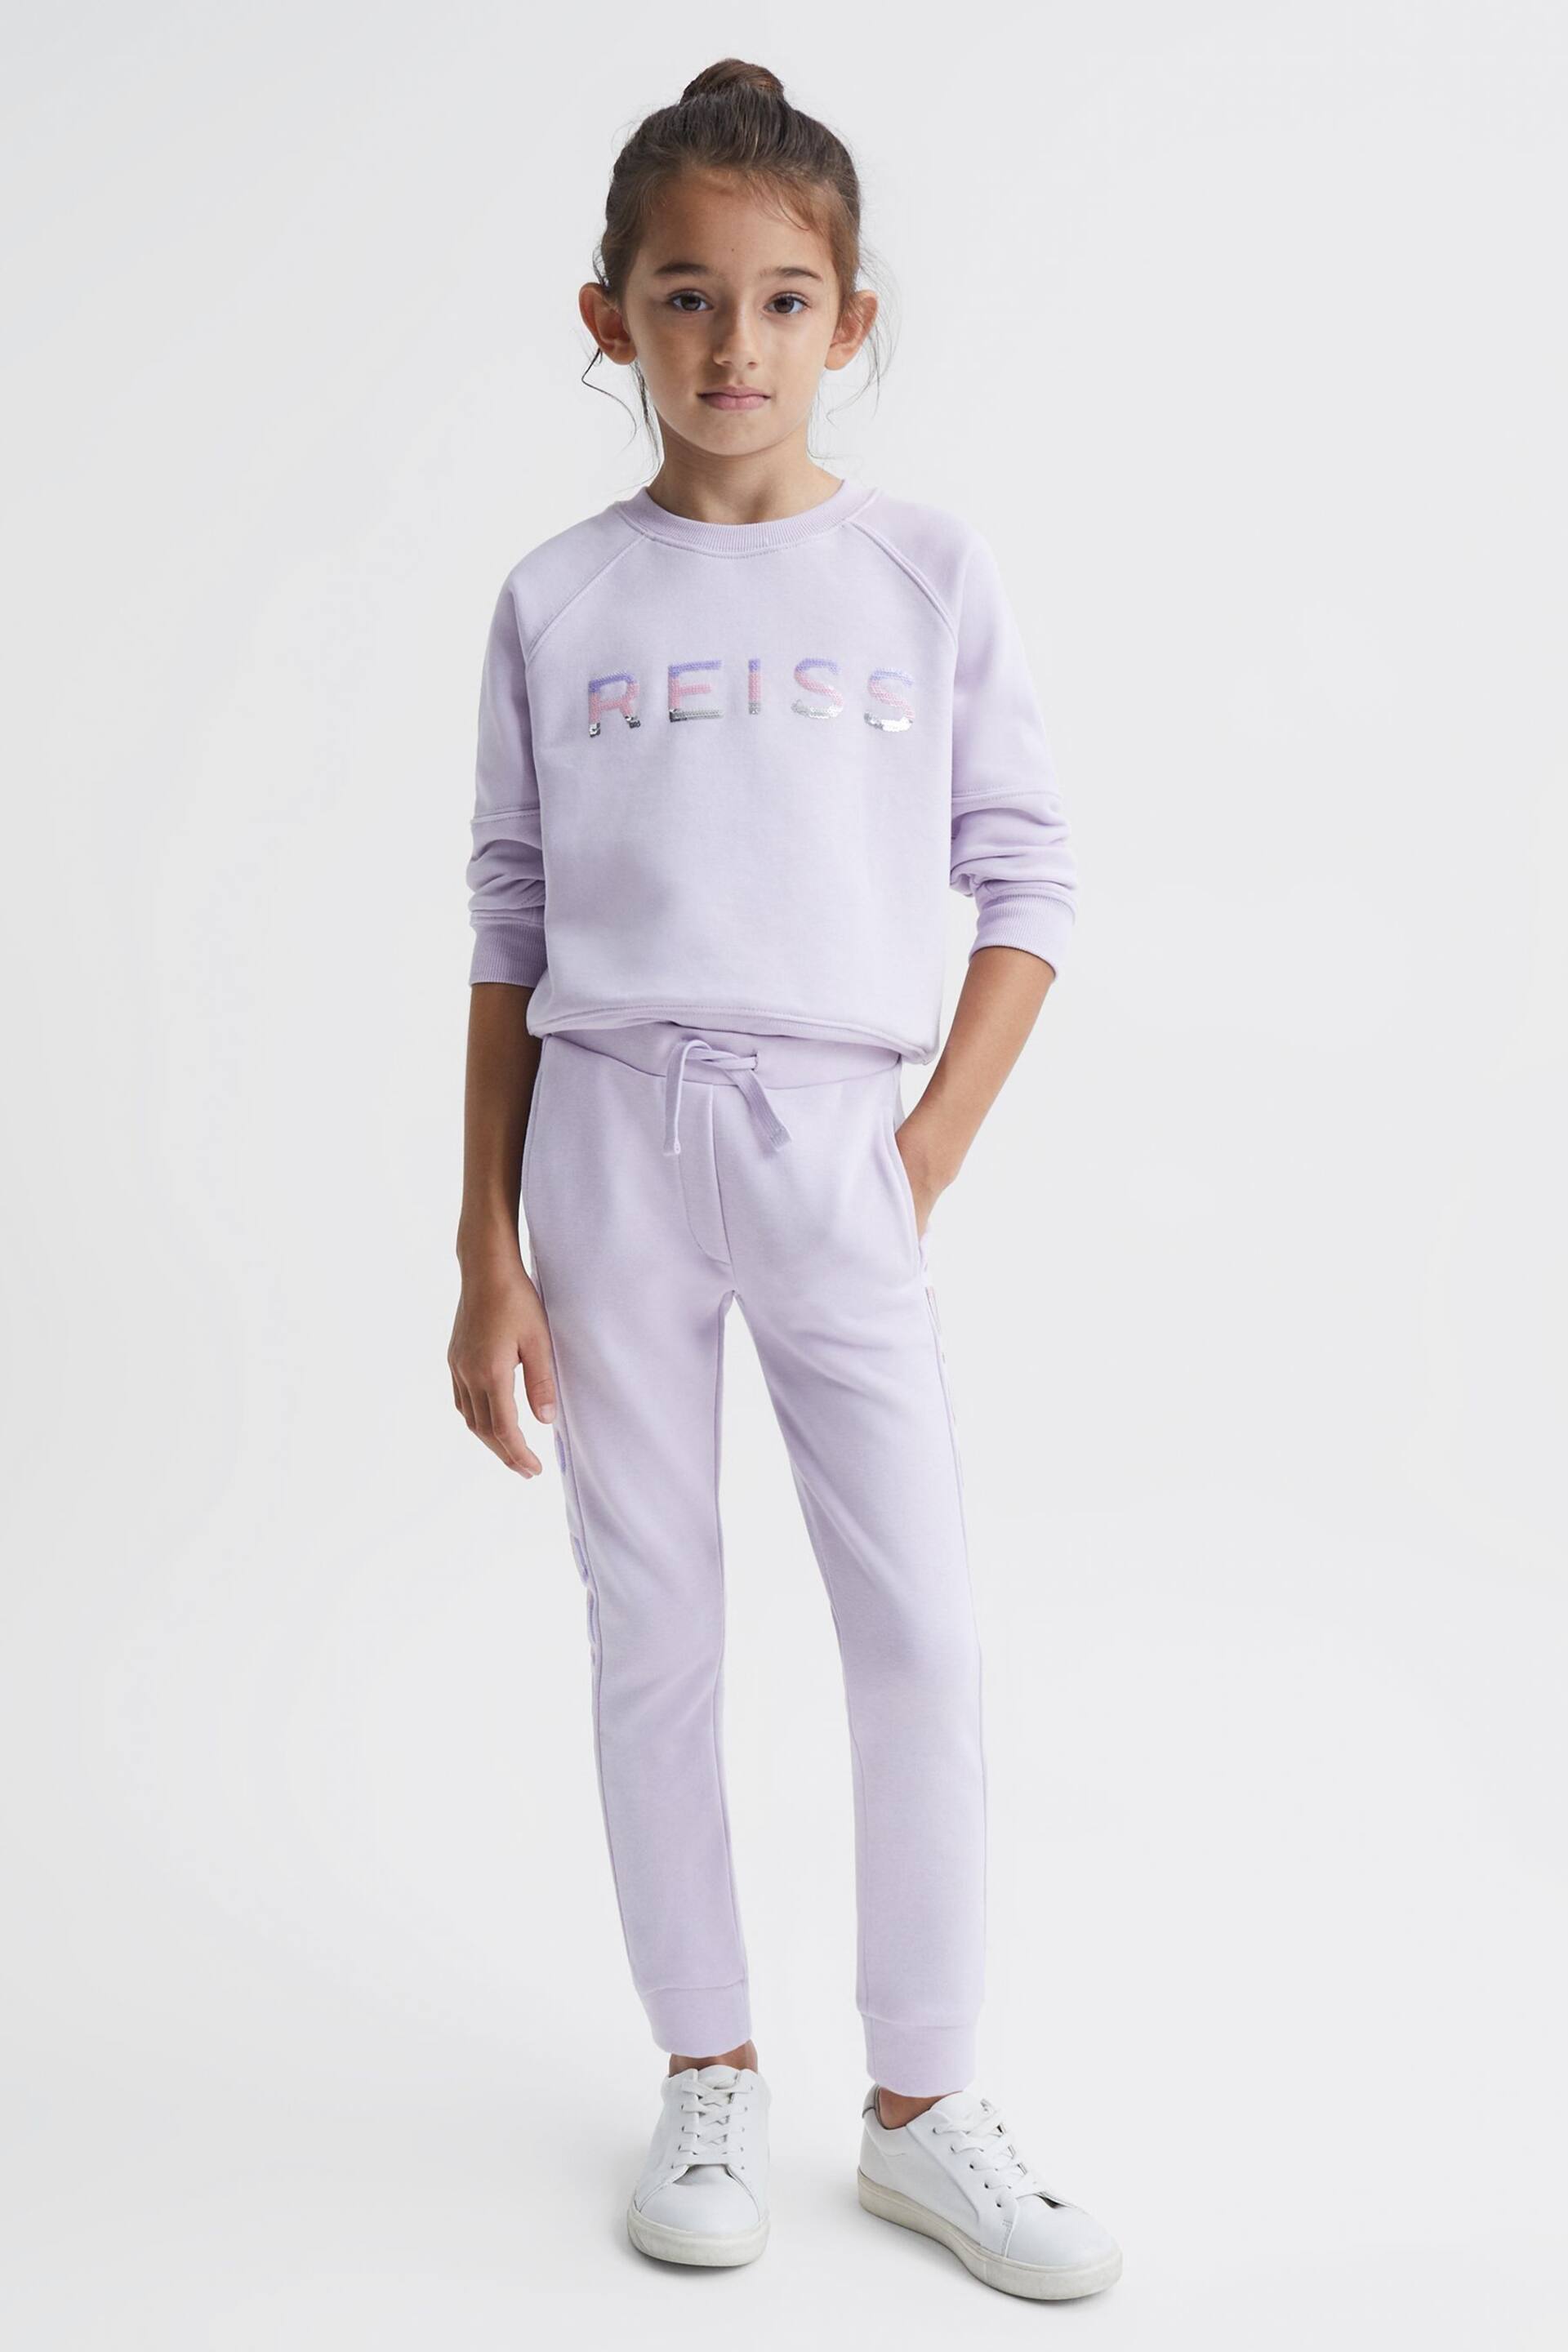 Reiss Lilac Maria Senior Sequin Joggers - Image 1 of 7